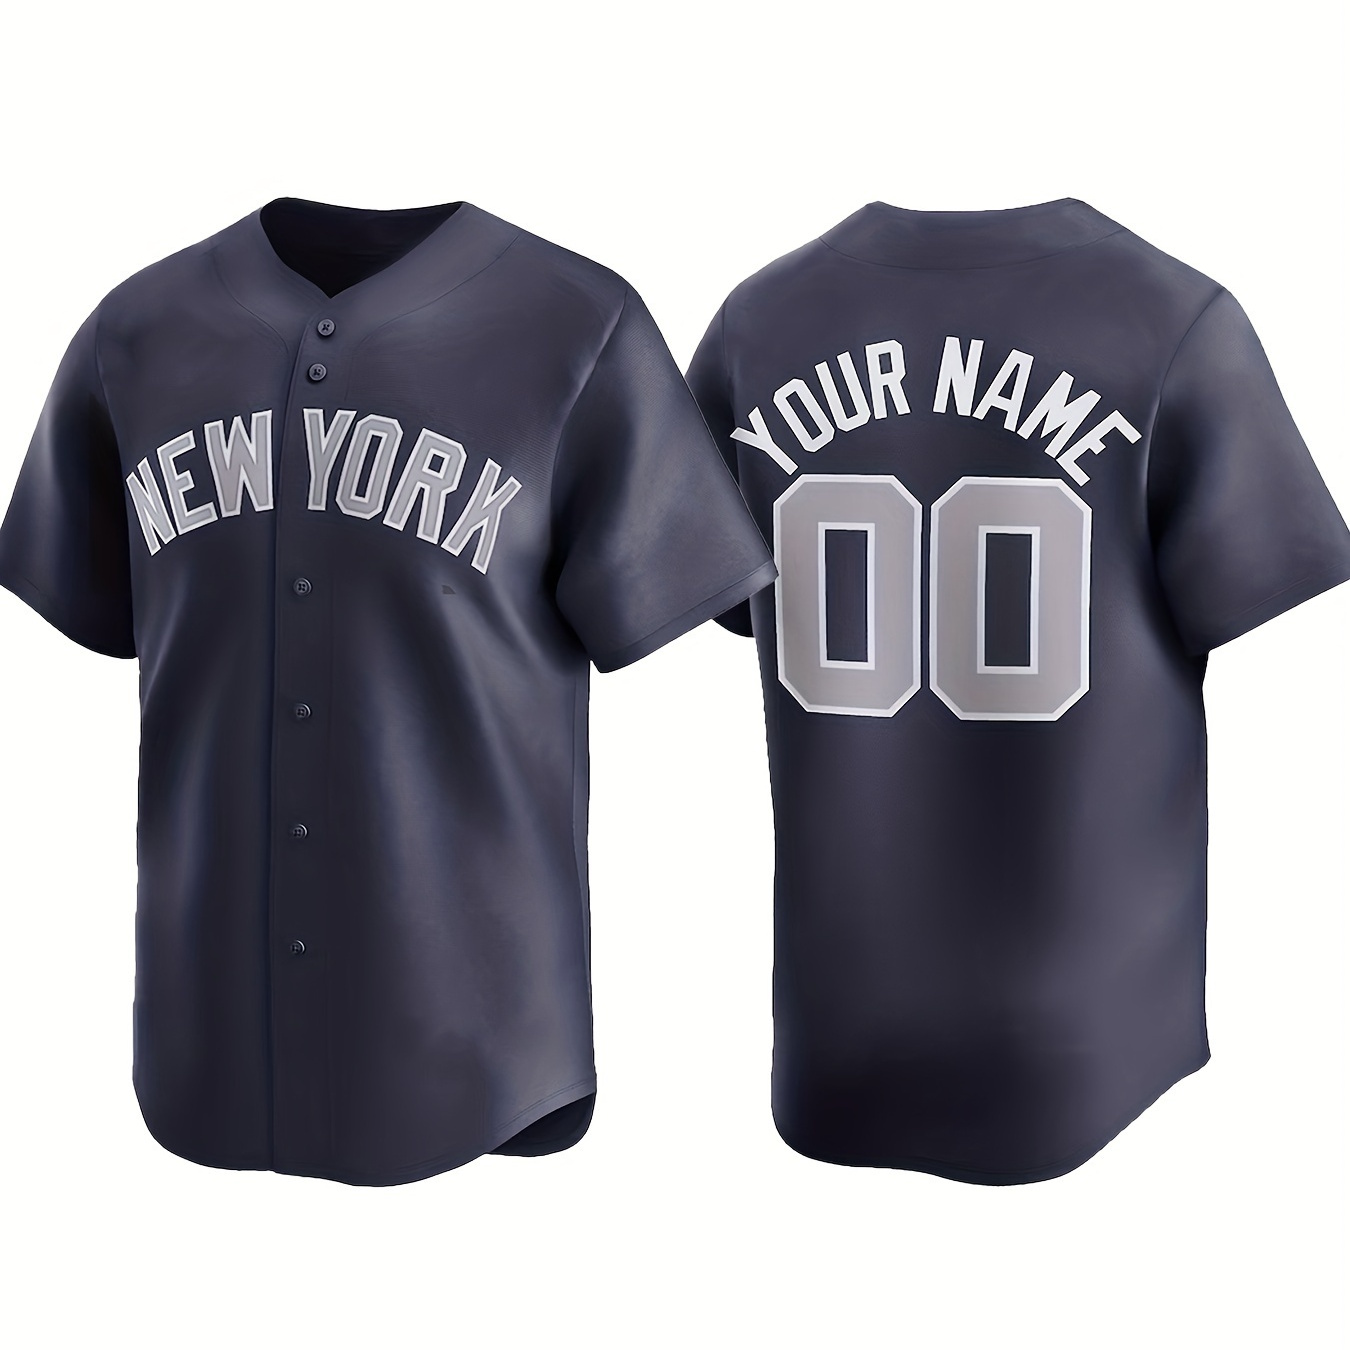 

Men's Personalized Custom Name And Number Baseball Jersey Shirt, New York Comfortable Fit Breathable Sportswear, Personalized Party Training Match Clothing